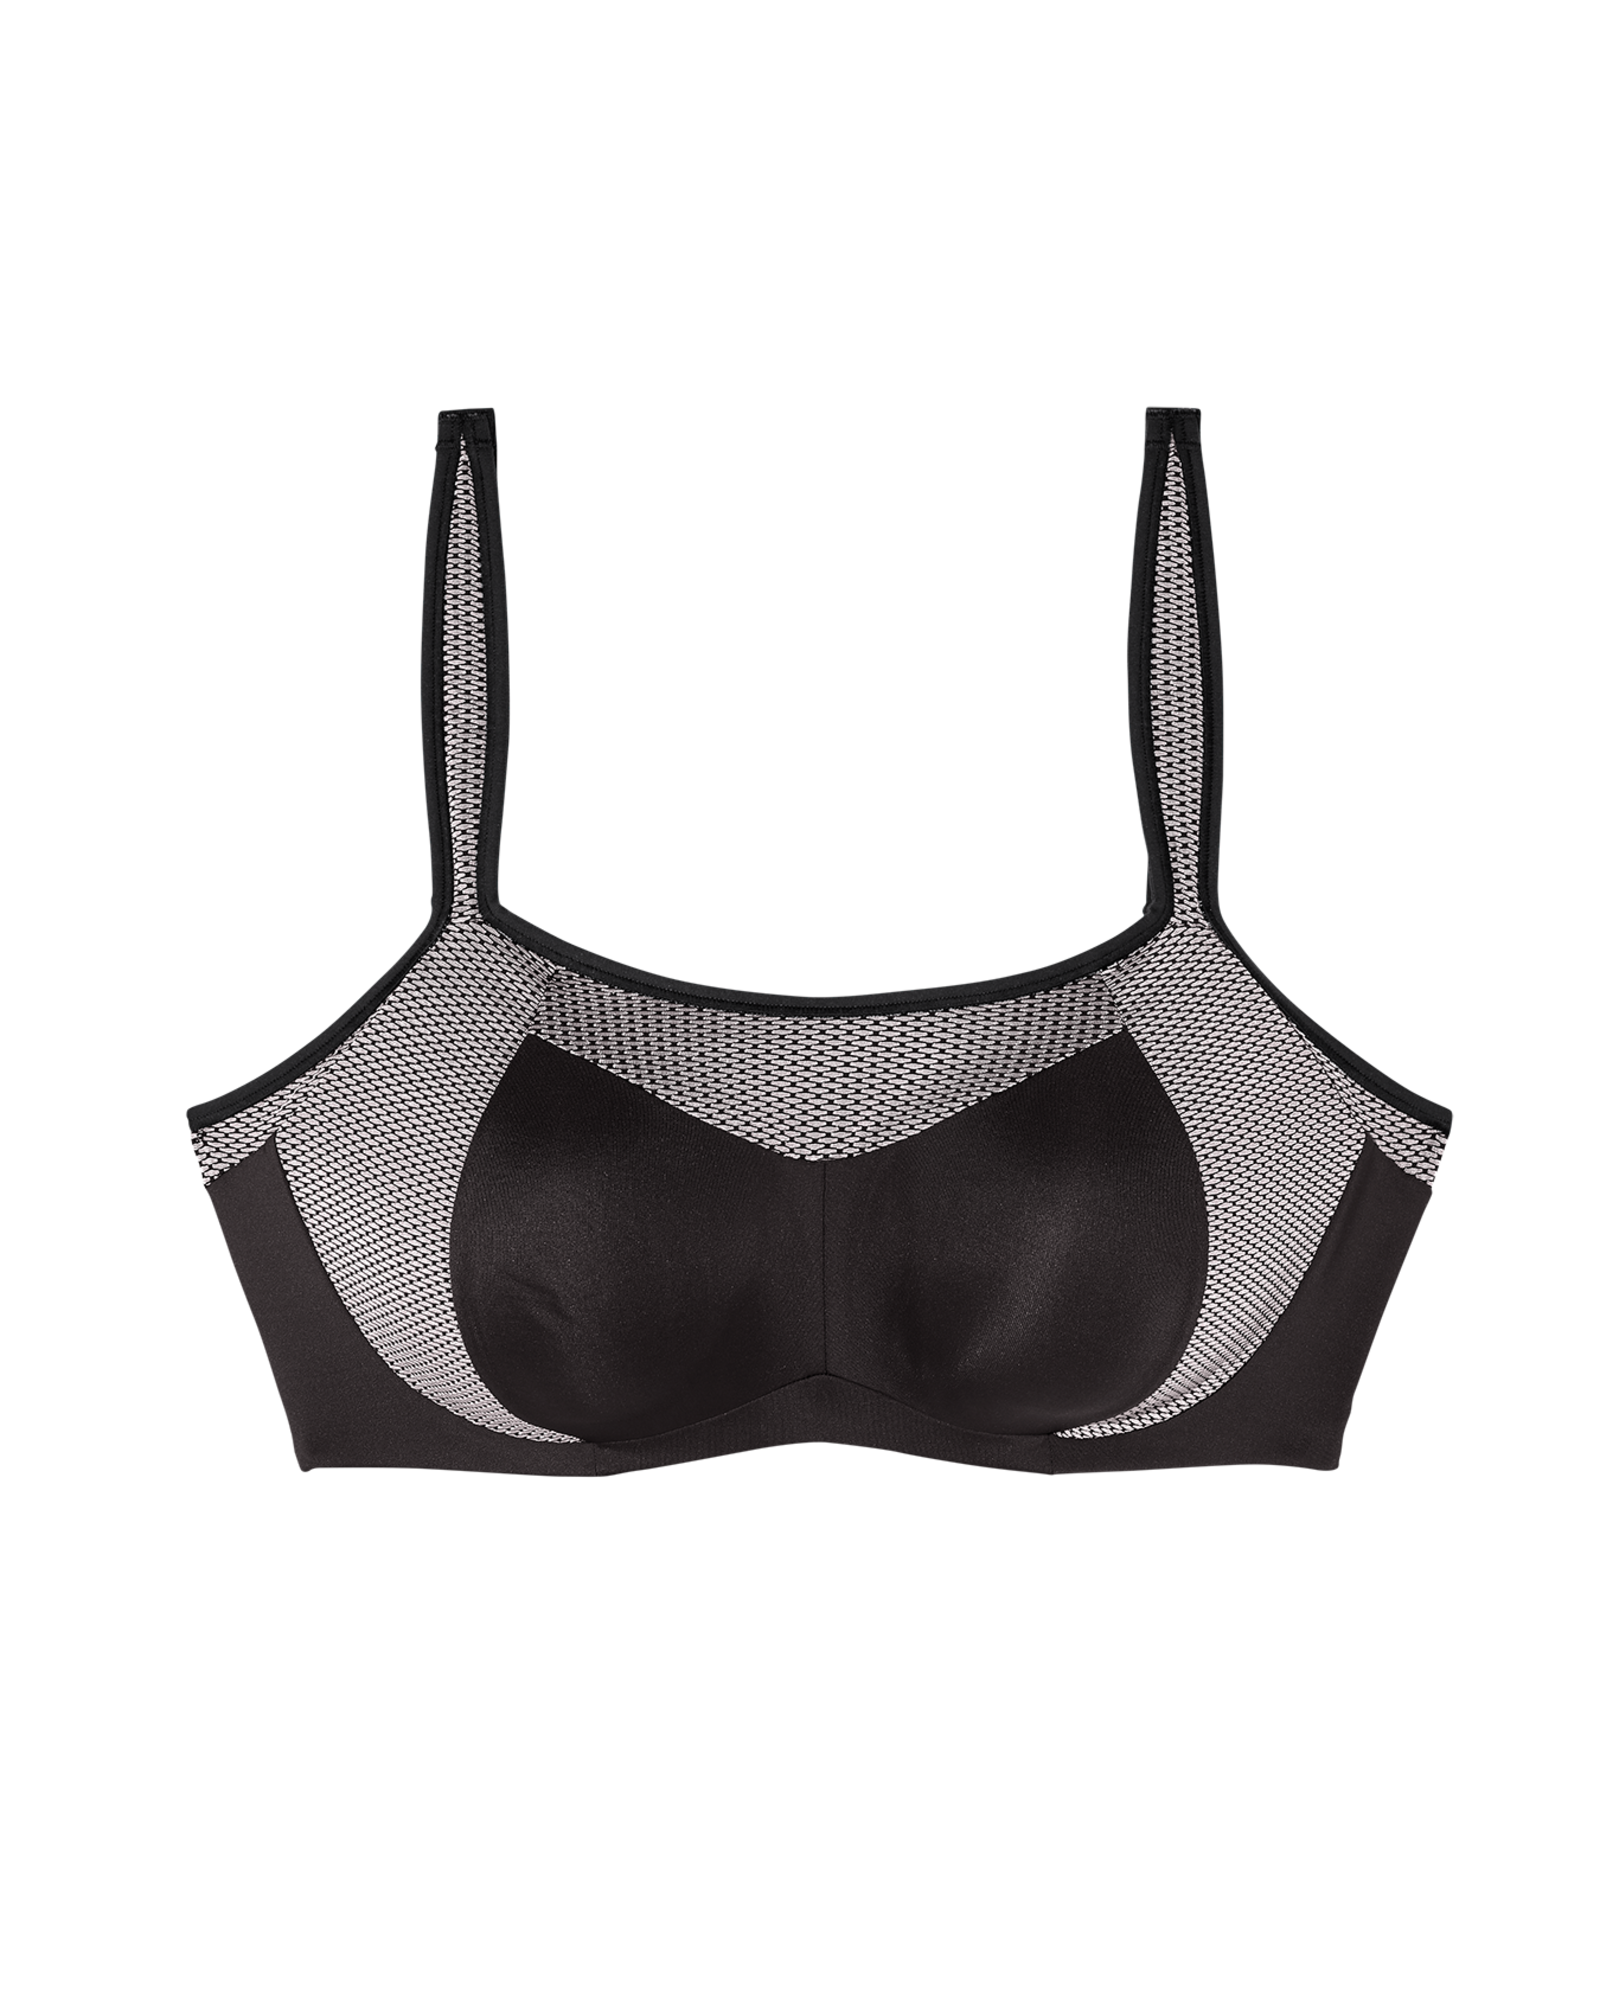 Sports Bras For Big Breasted Women!! Finally!! Ft. Dia&Co.